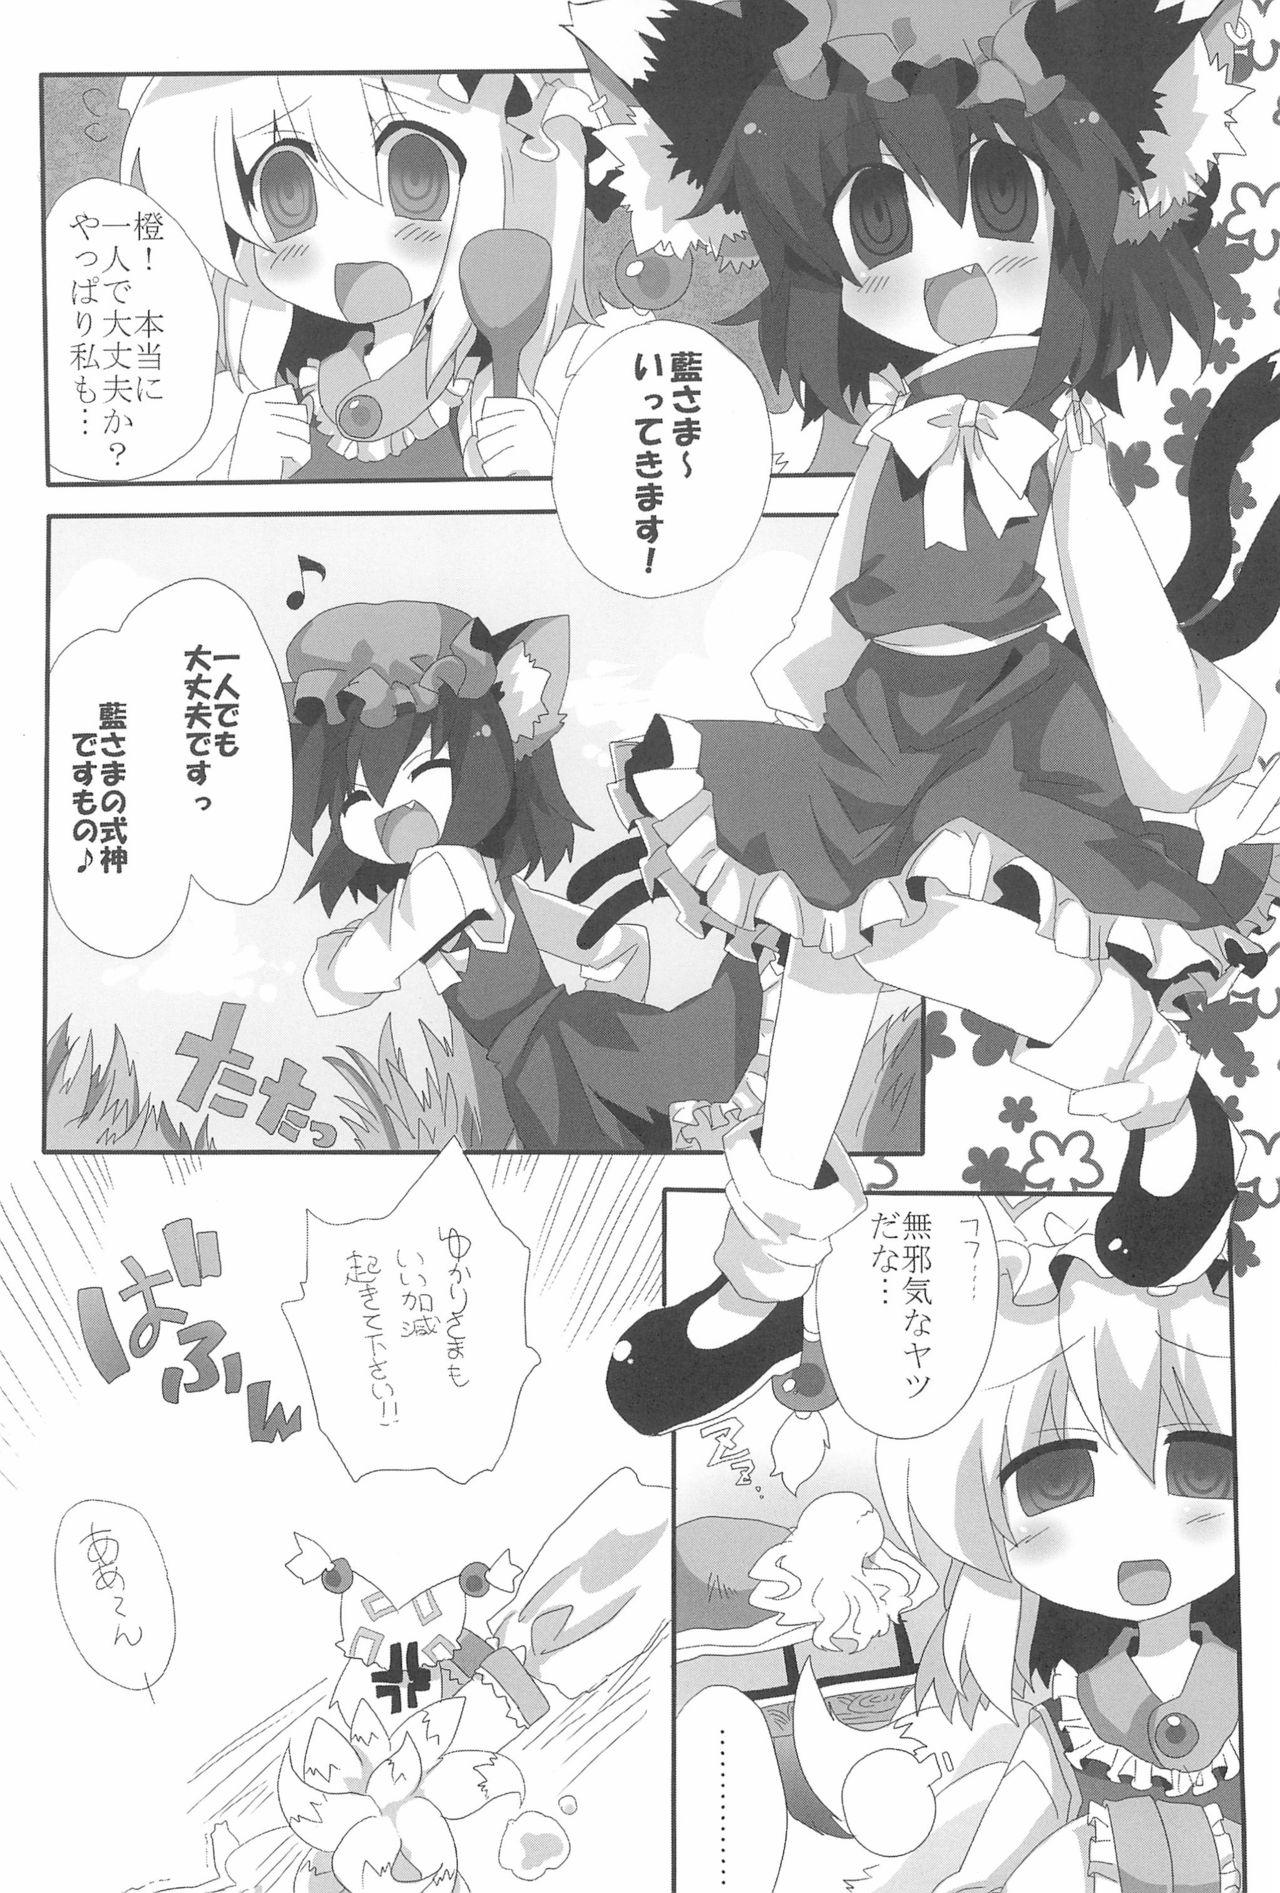 Camgirls NYAS! ATTRACTION - Touhou project Ebony - Page 4